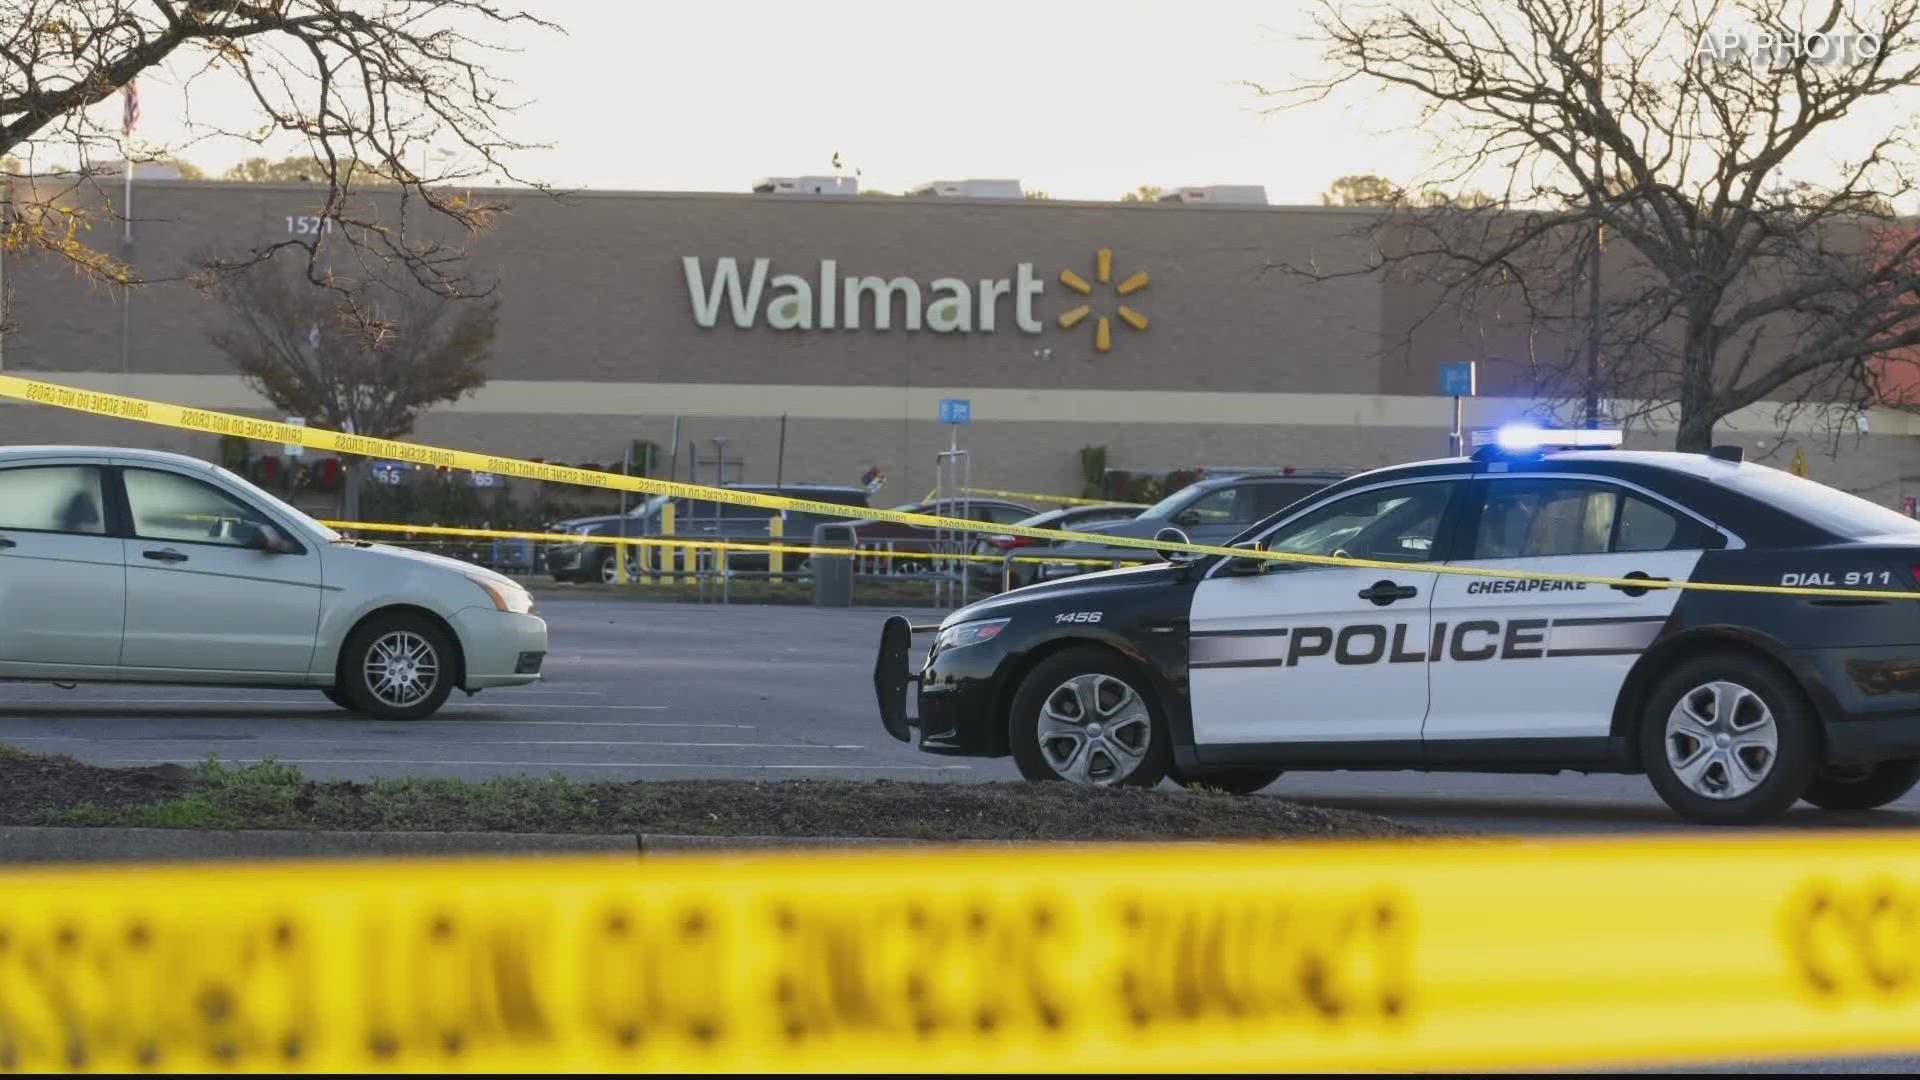 A shooter opened fire in a Walmart in Virginia late Tuesday, leaving six people dead, police said, in the country's second high-profile mass killing in a few days.